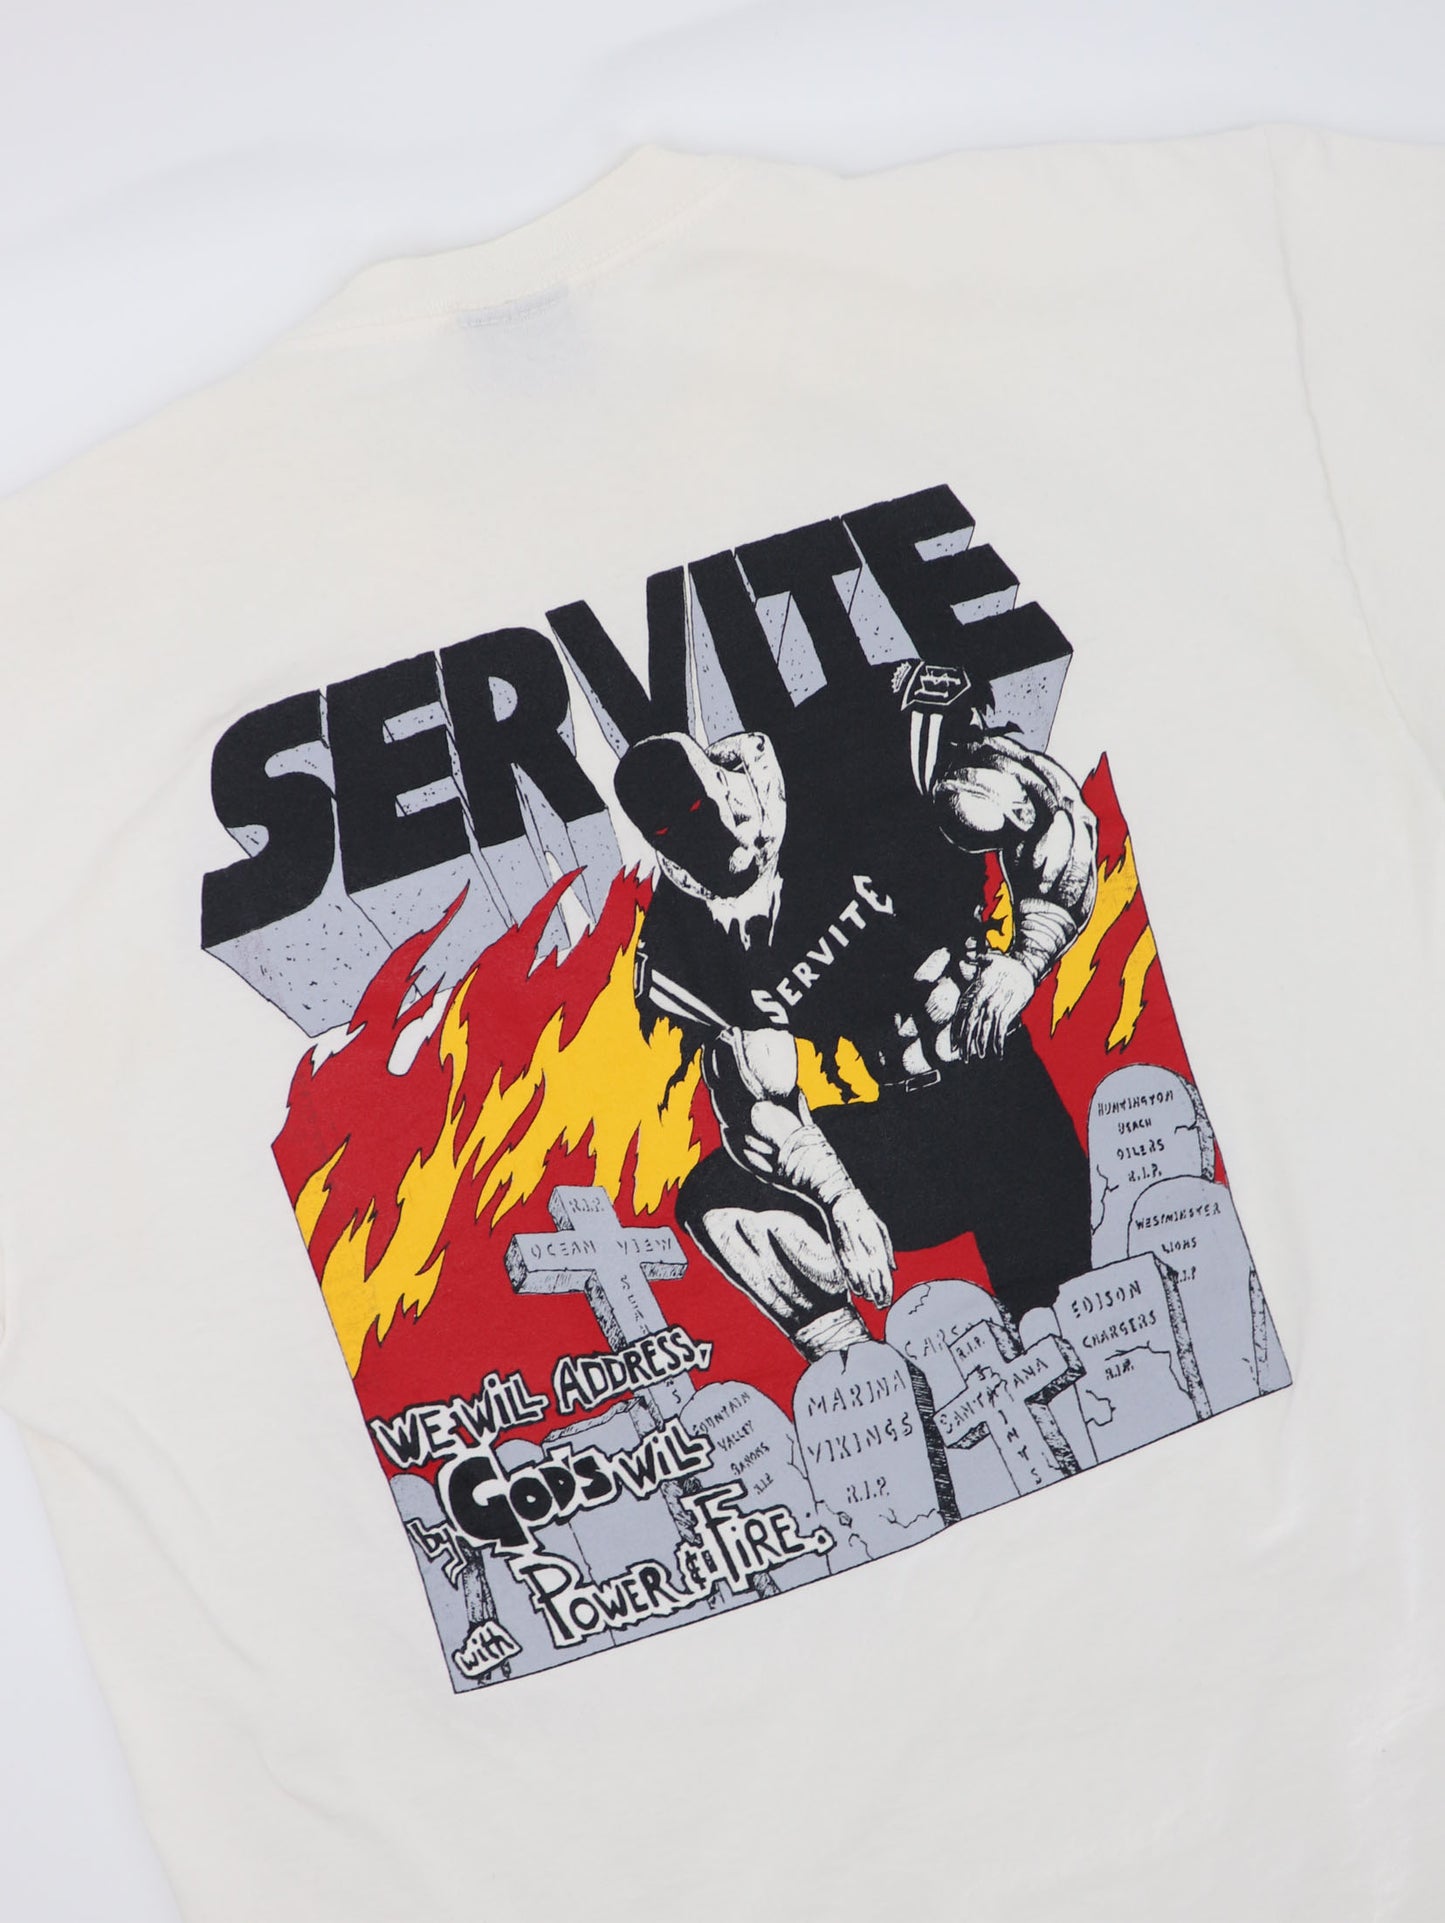 SERVITE FRIARS SOCCER TEE 1990s MADE IN USA